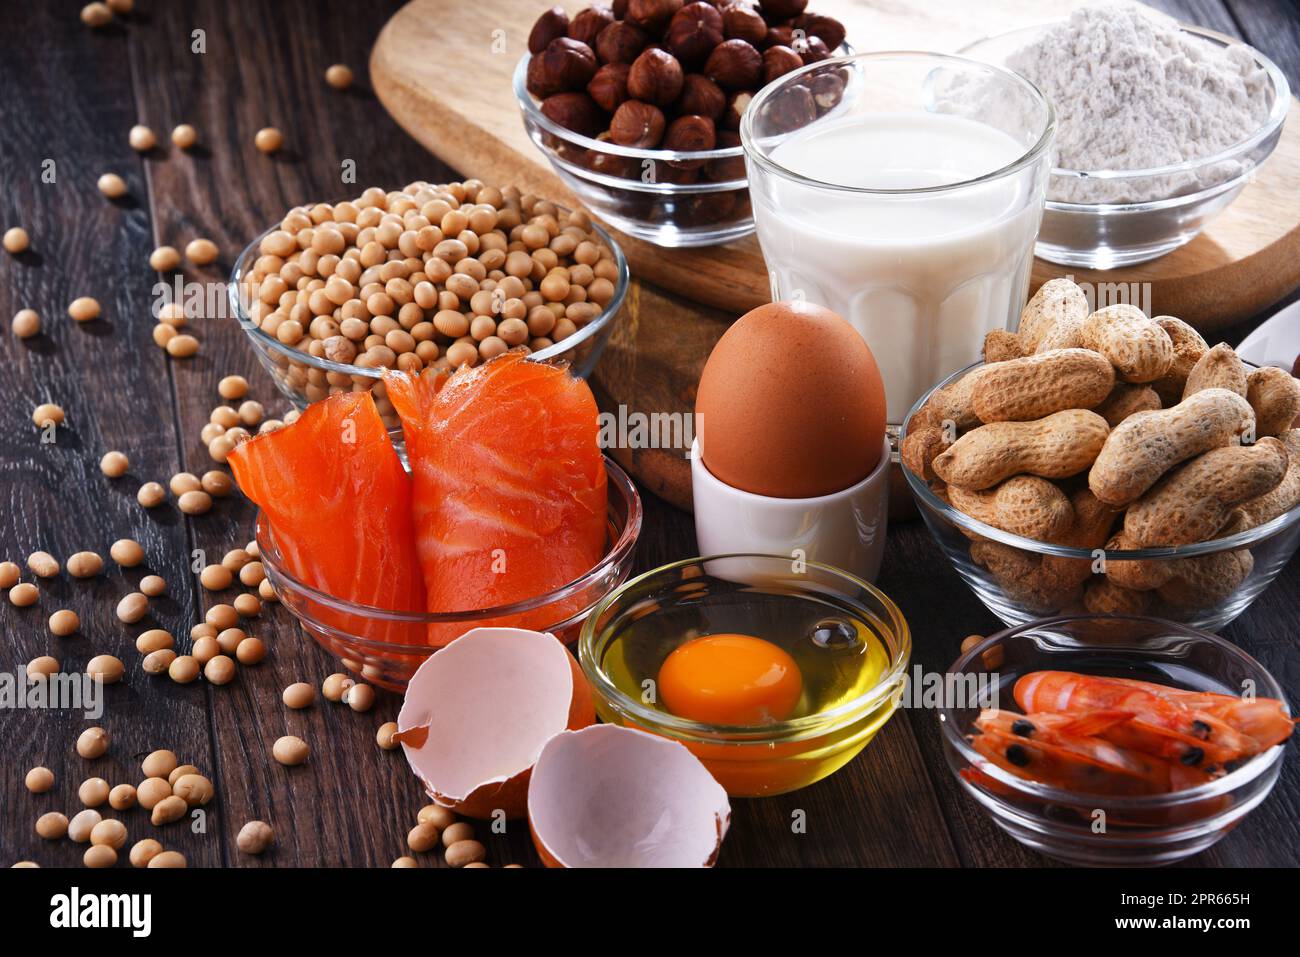 Composition with common food allergens Stock Photo